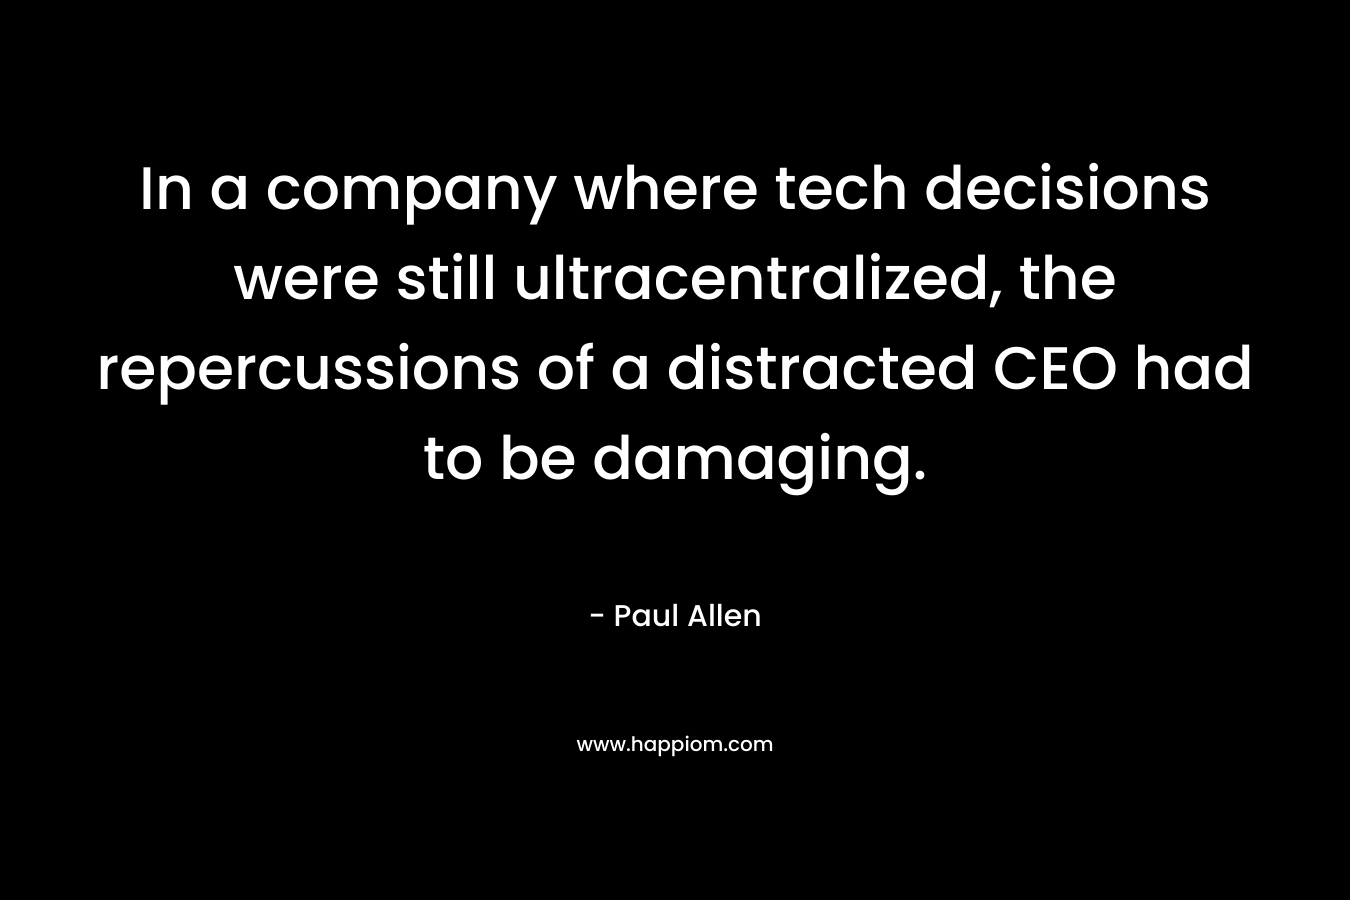 In a company where tech decisions were still ultracentralized, the repercussions of a distracted CEO had to be damaging. – Paul  Allen